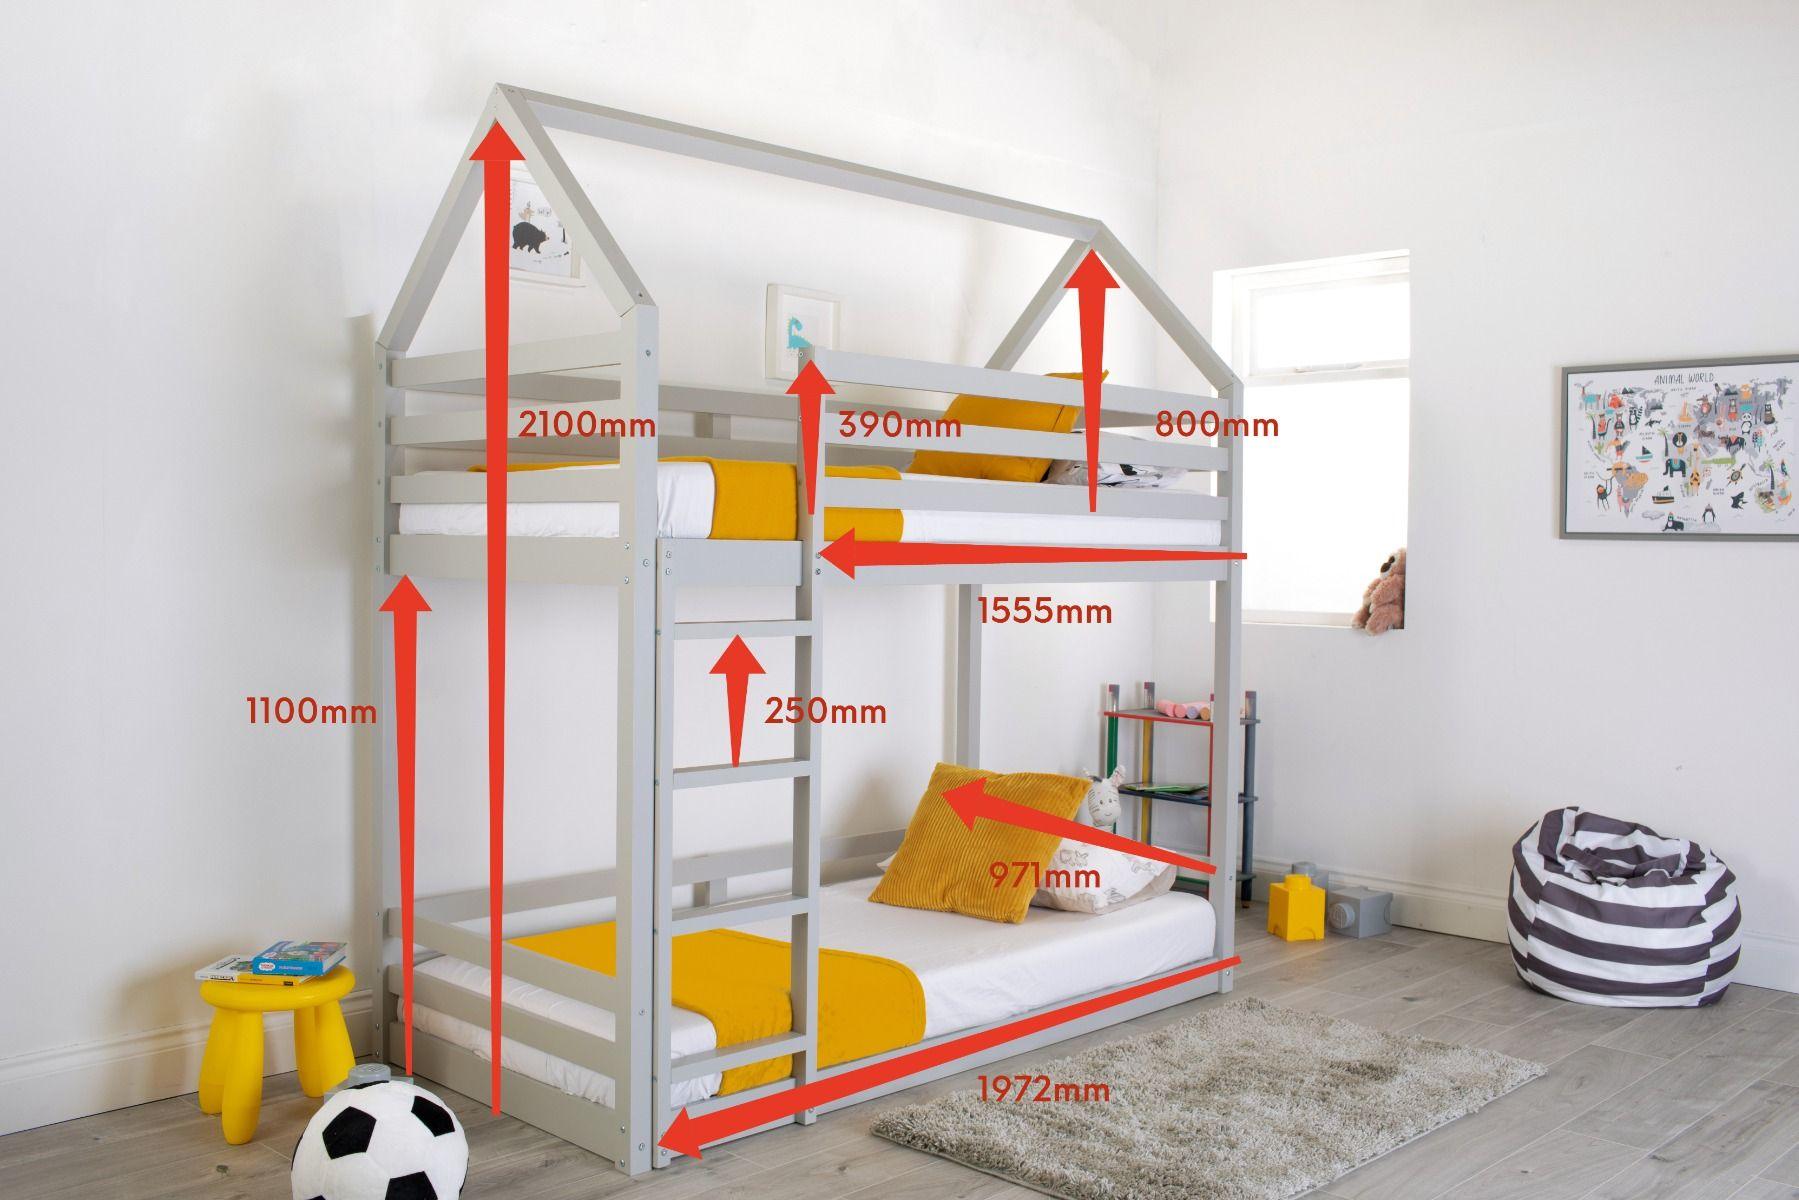 Flair Play House Bunk Bed Frame Grey Pine Wood Dimensions